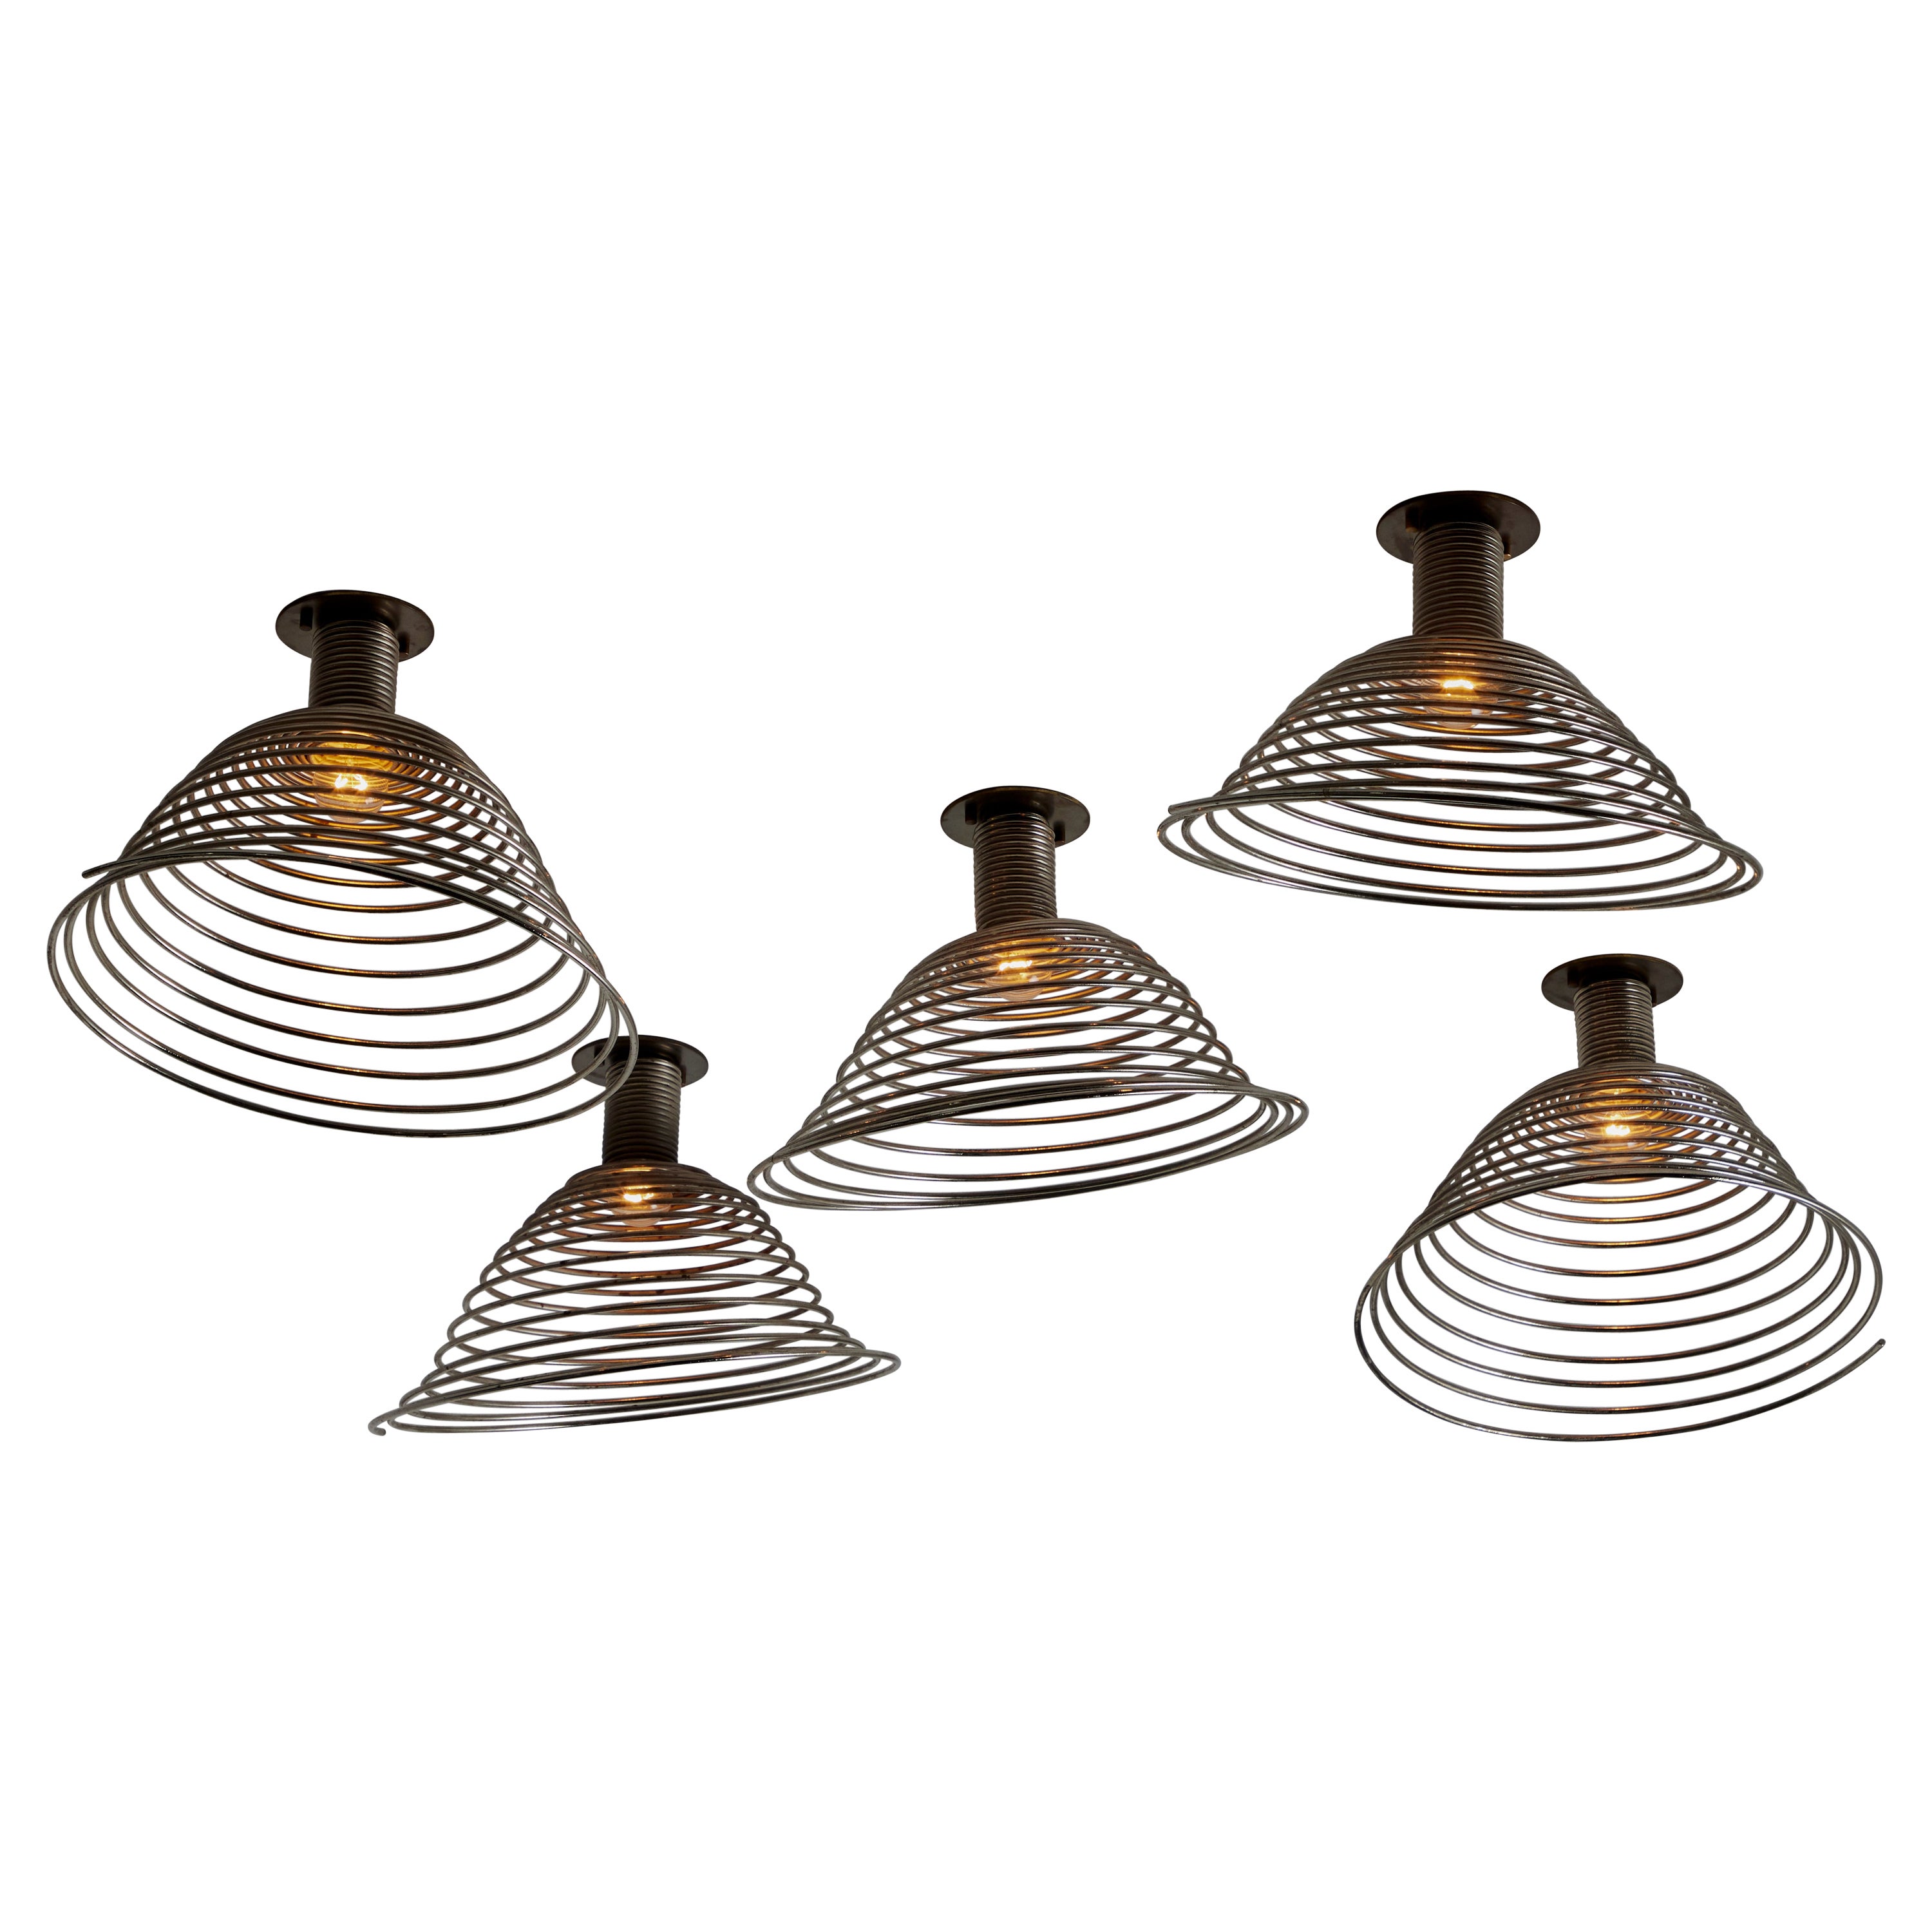 'Spirali' Ceiling or Wall Lights by Angelo Mangiarotti for Candle